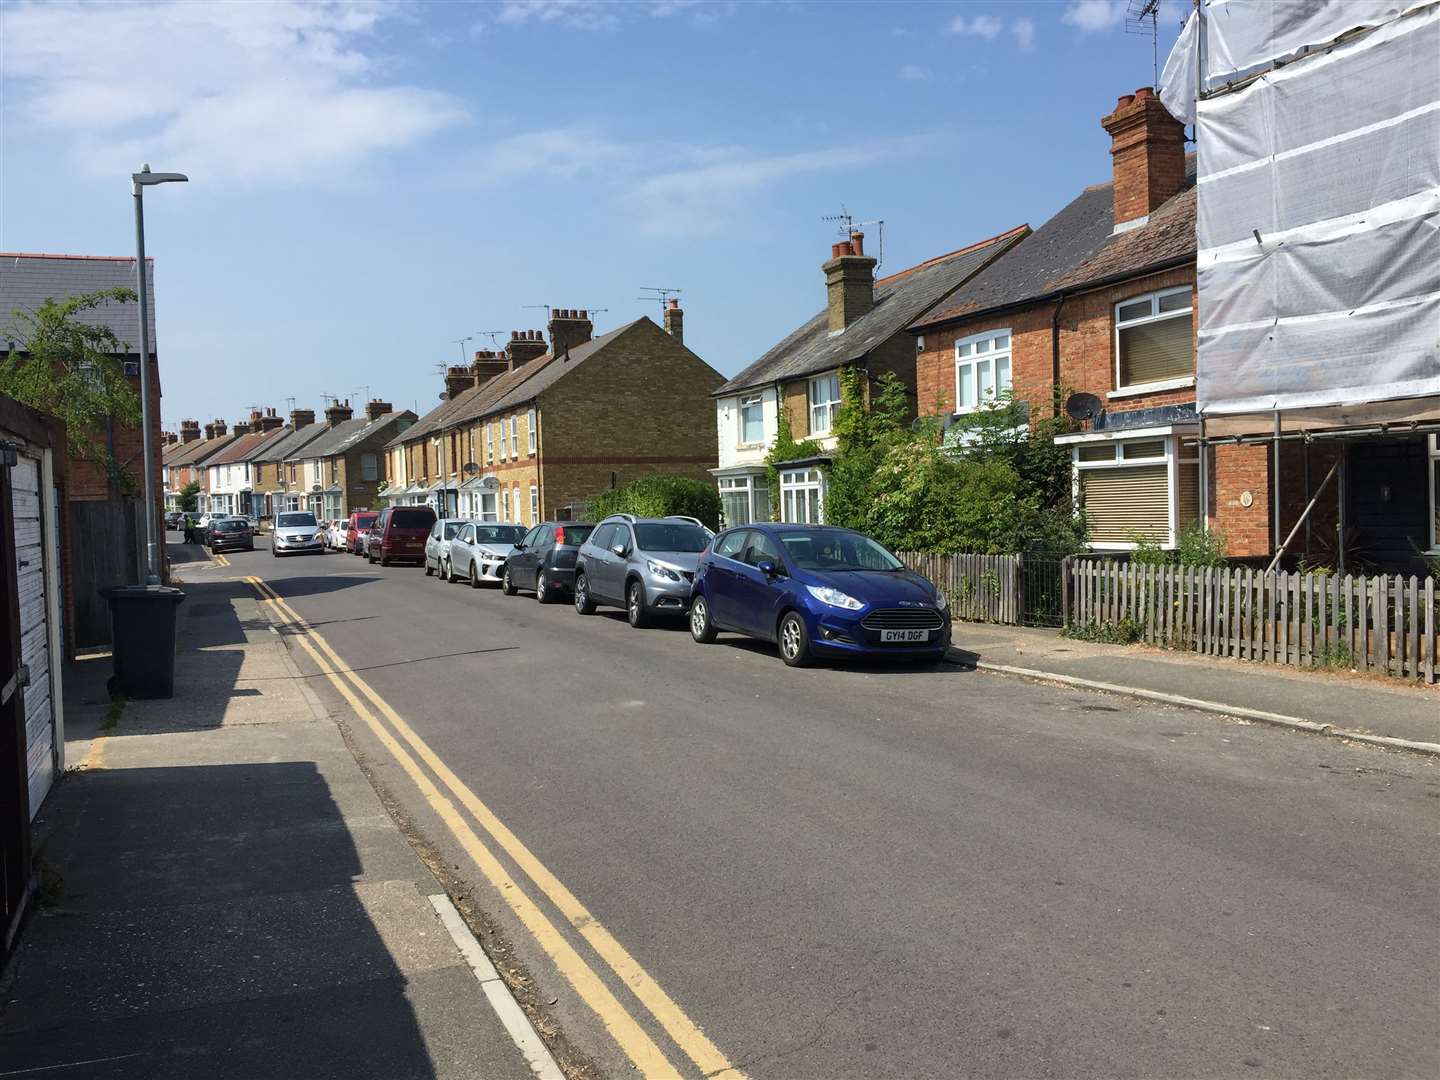 There are a number of second homes and Airbnbs in Albert Street, Whitstable